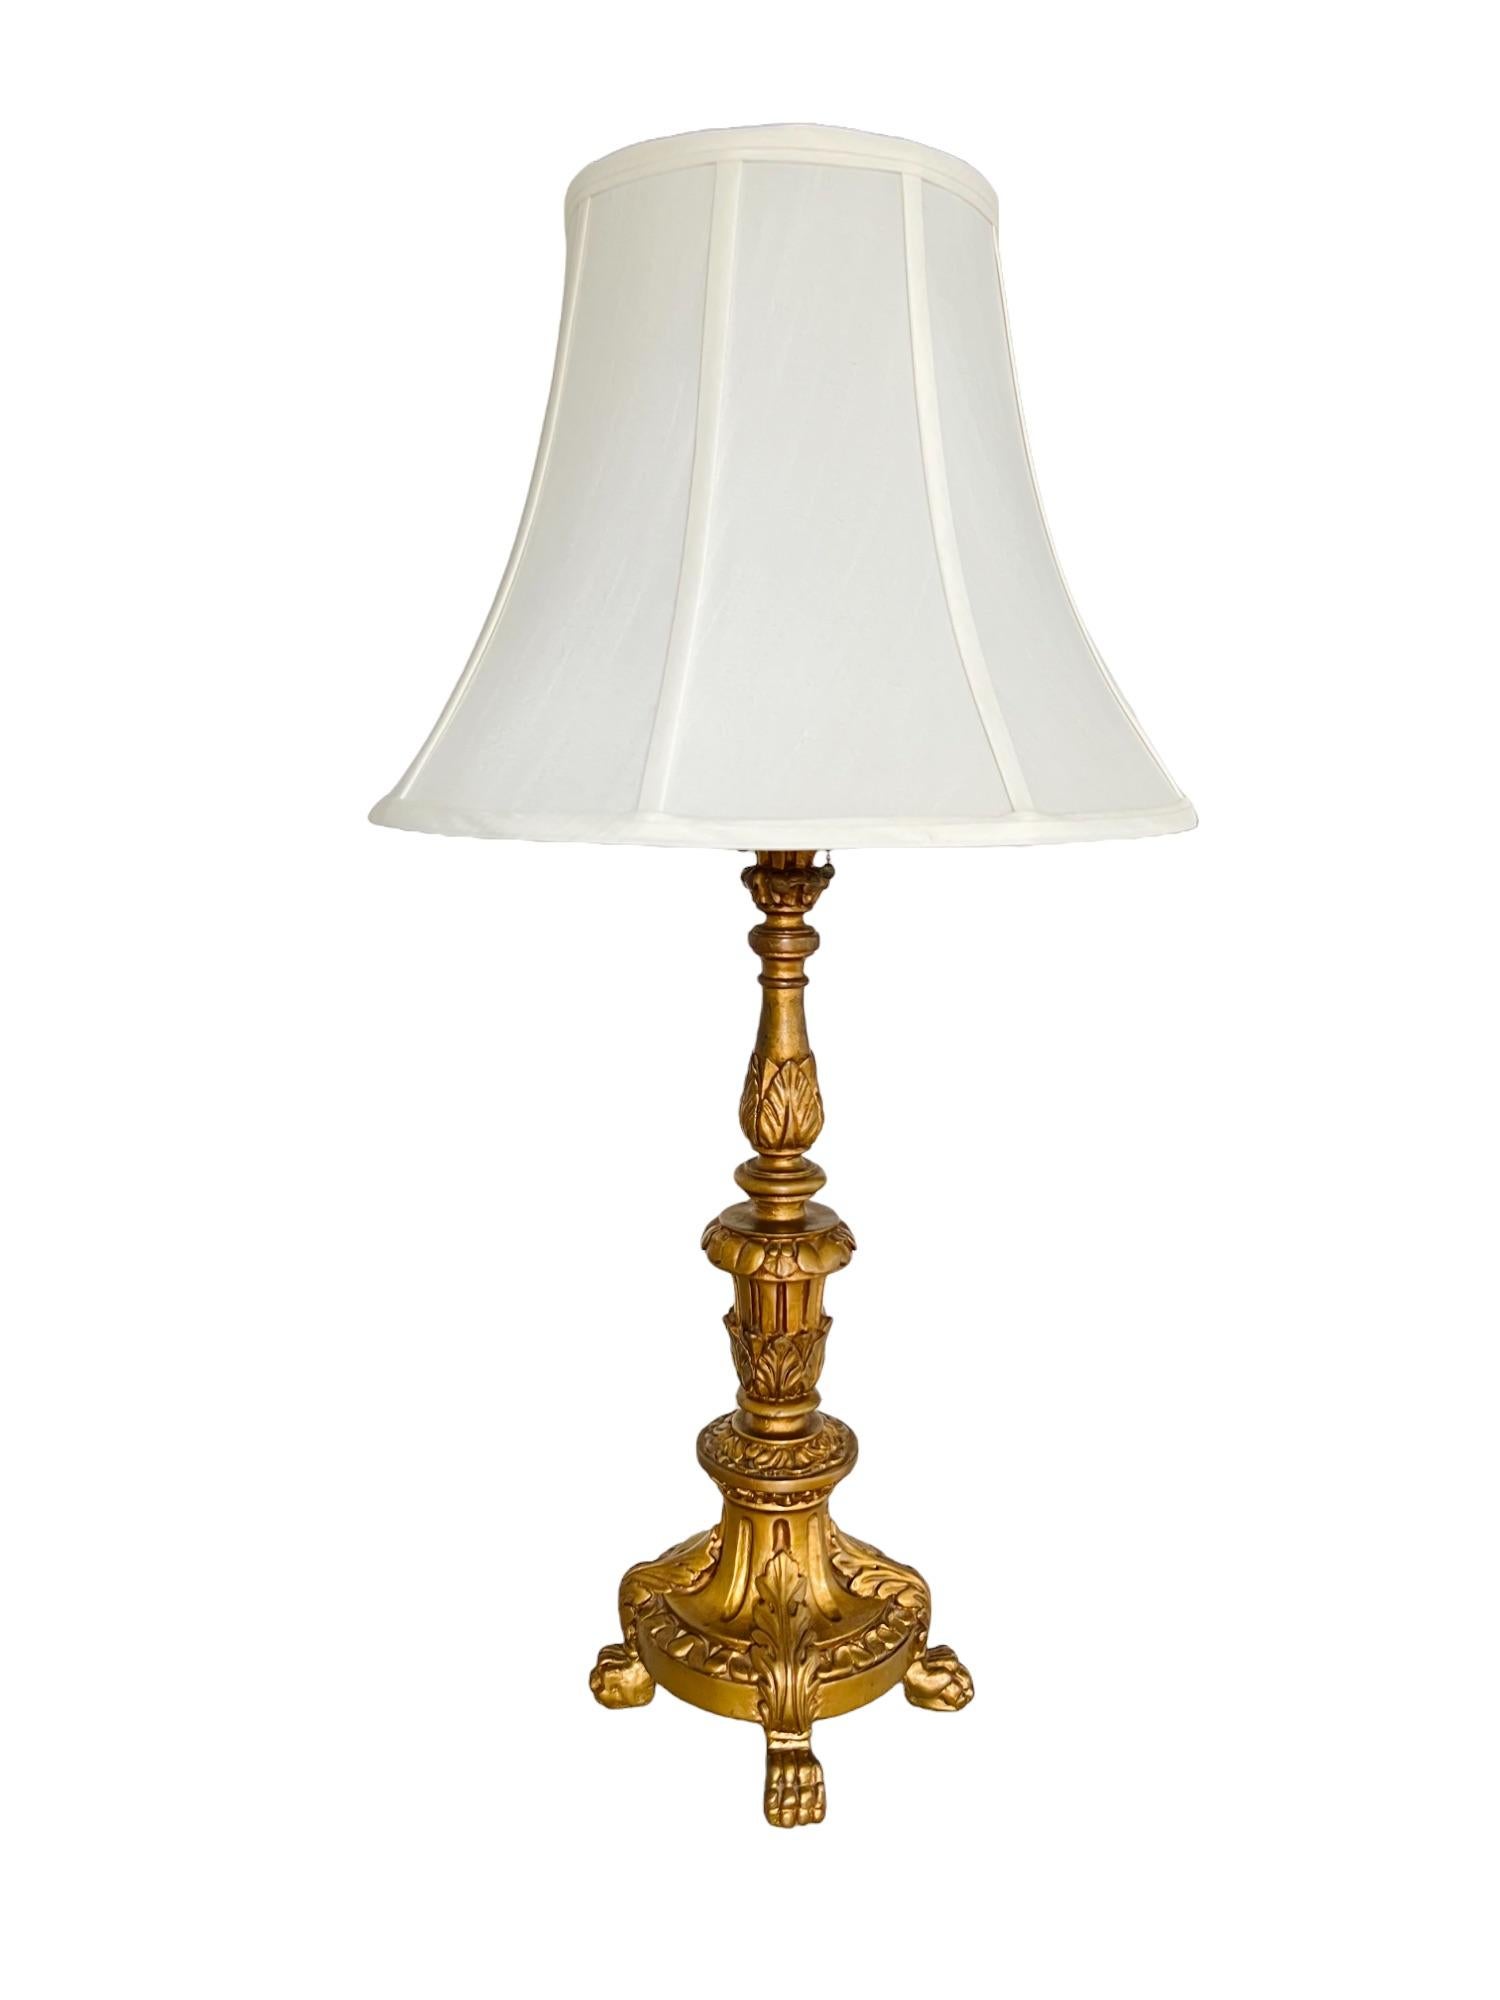 An early 20th century French Empire torchère style table lamp with shade. Gilded gessoed candlestick form metal body with paw foot mounted base. Two light sockets with individual pull cord operation. Off-white linen blend bell shade.

Dimensions: